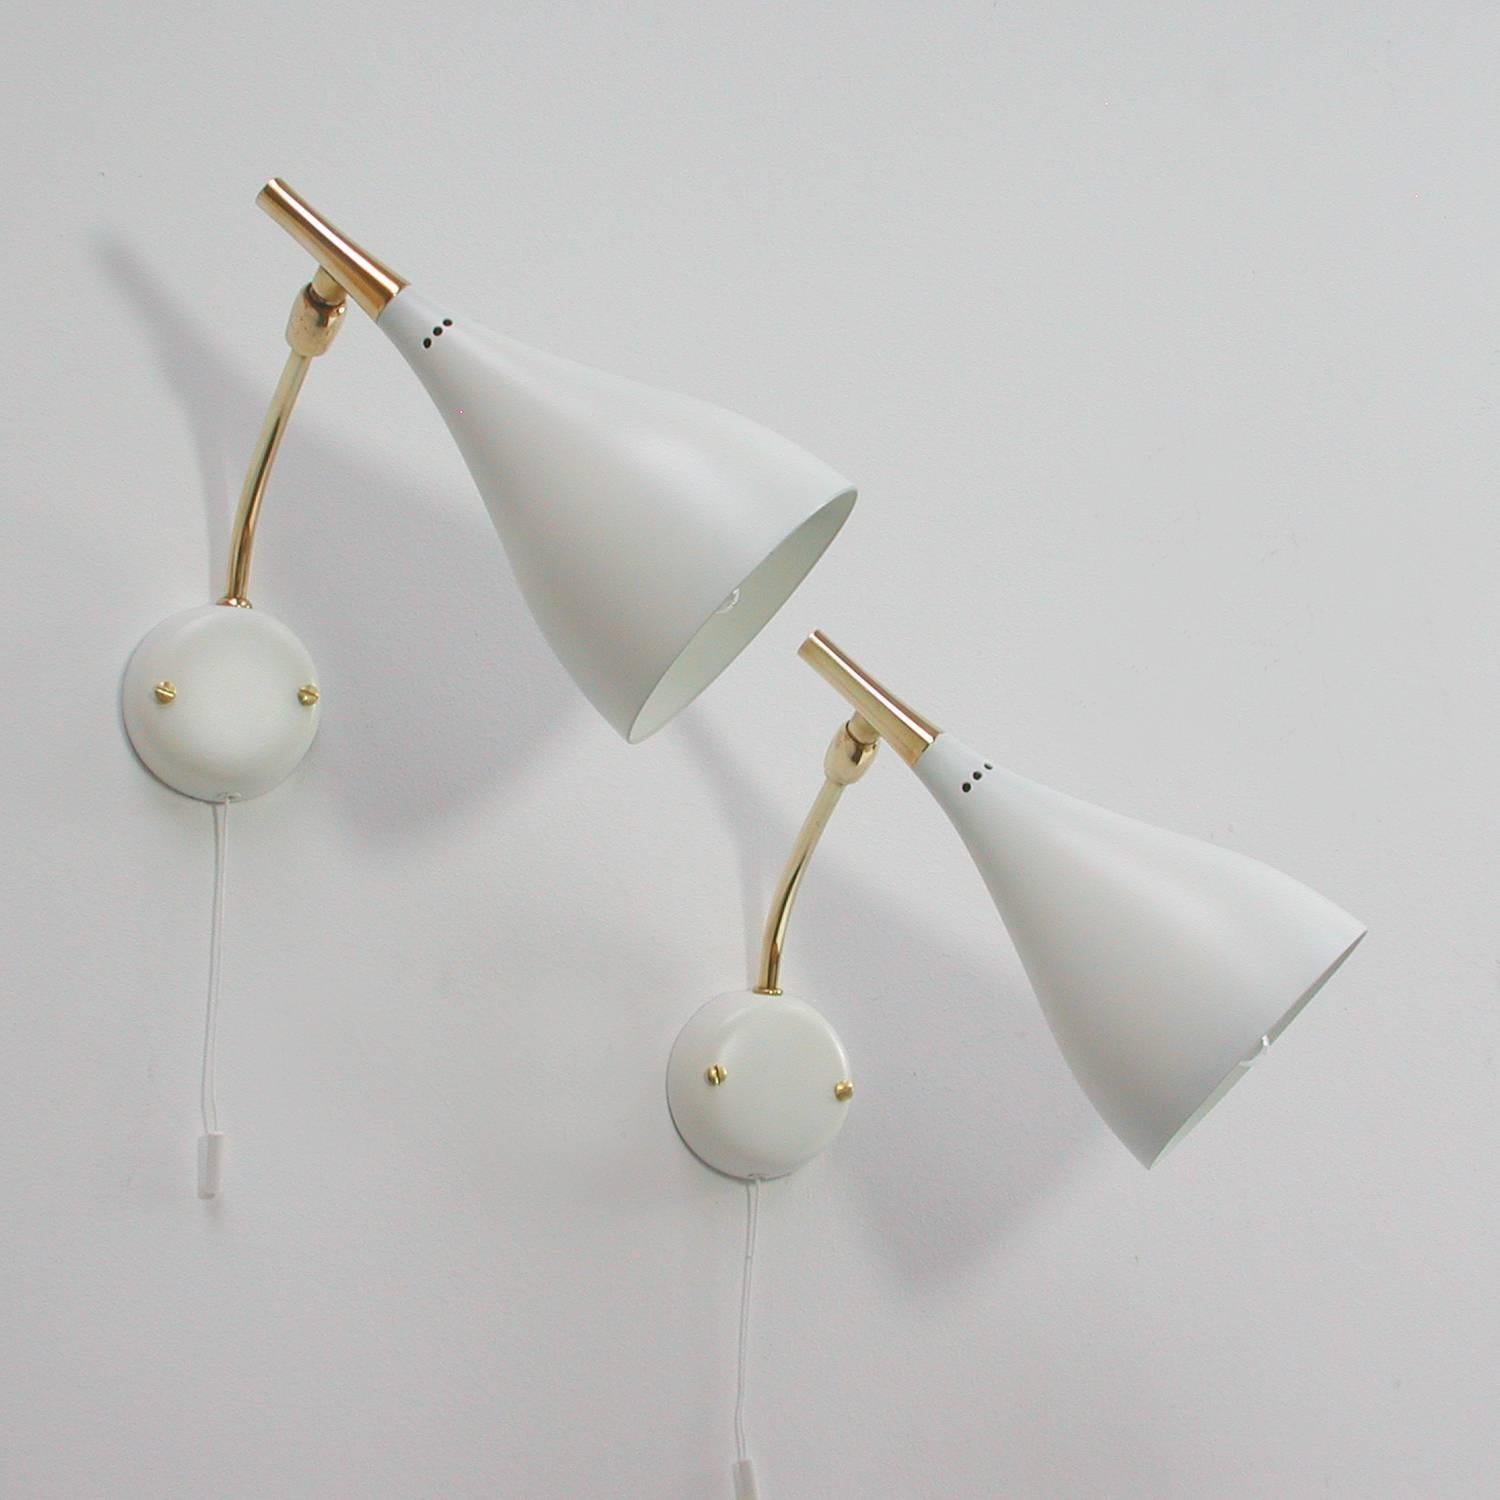 Lacquered Mid-Century Italian Adjustable Sconces, Wall Lights, 1950s